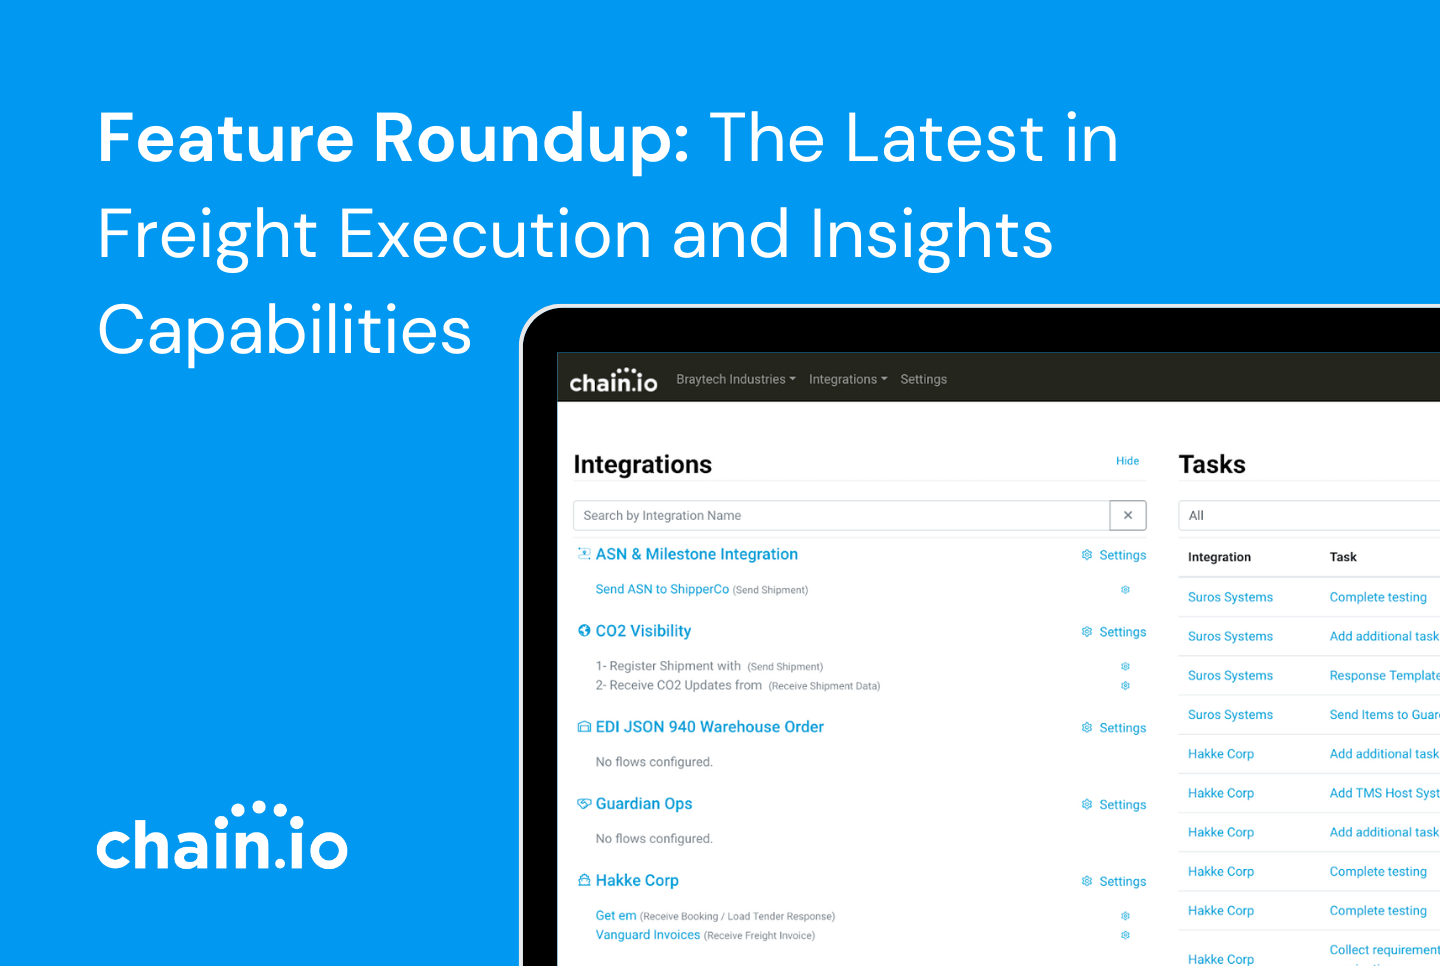 Feature Roundup: The Latest in Freight Execution and Insights Capabilities